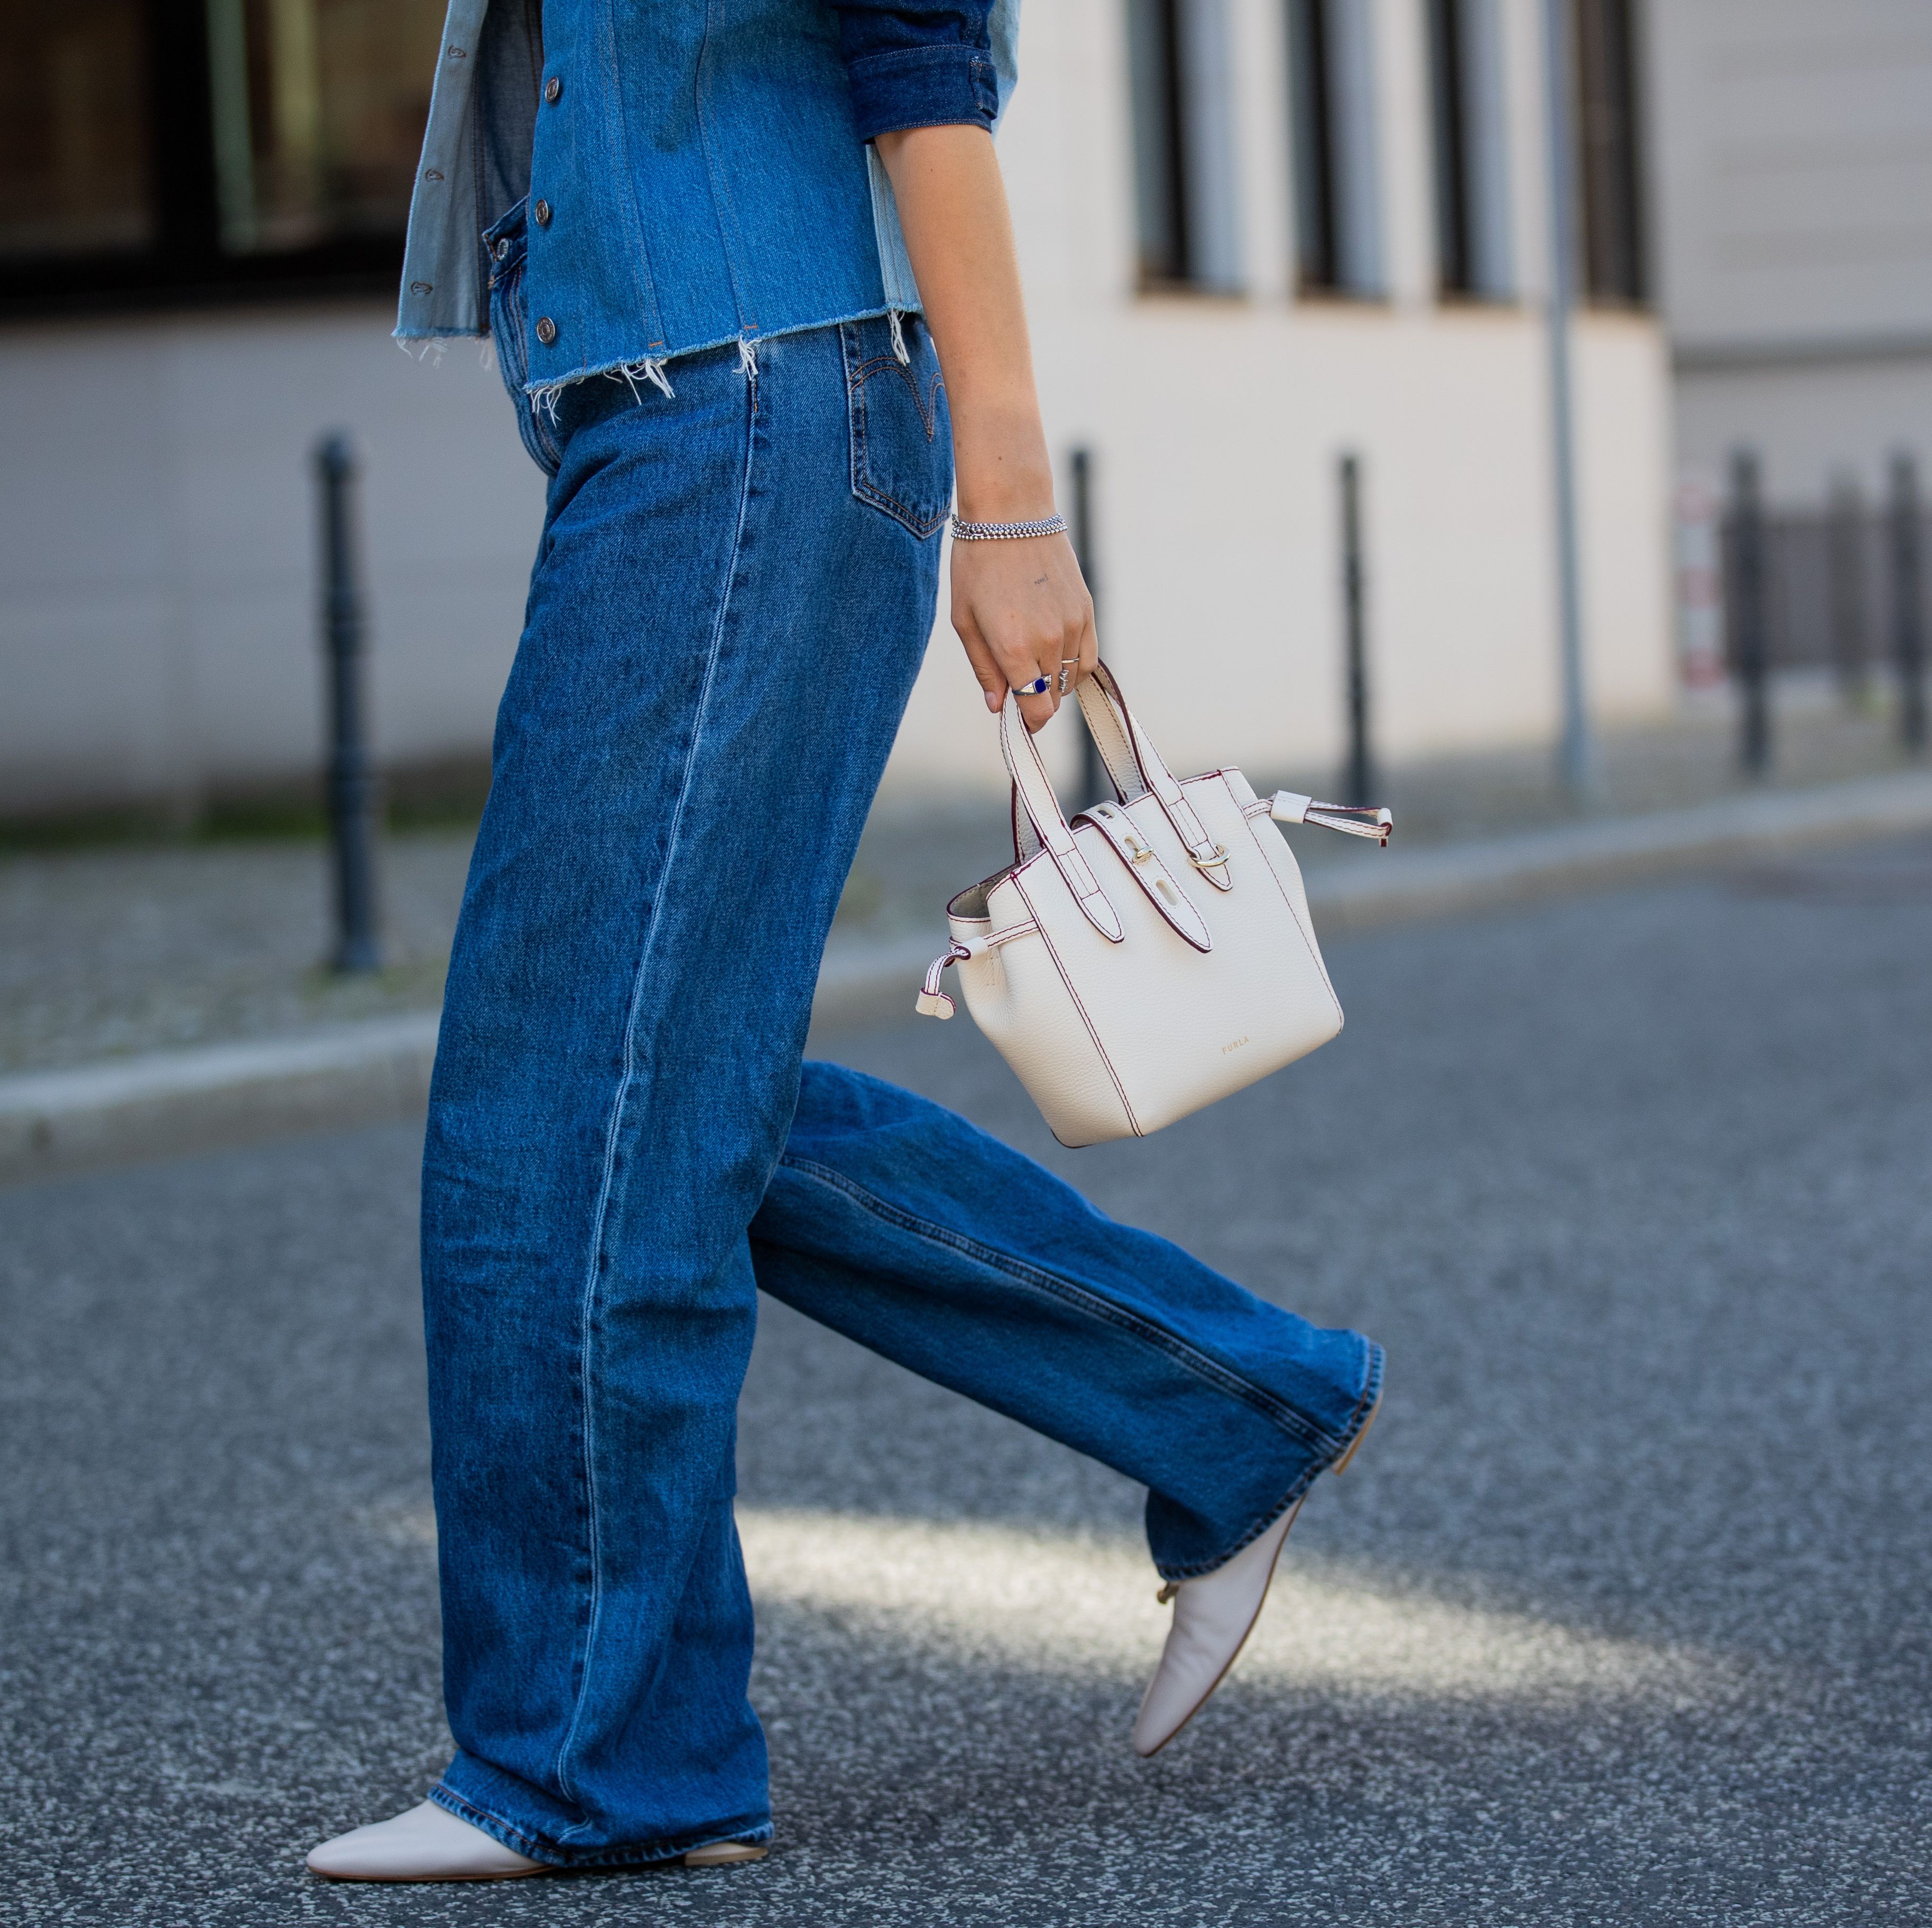 berlin, germany june 02 jacqueline zelwis is seen wearing 7 for all mankind x marques almeida denim jacket, white cropped top
zara, levis jeans, agl shoes, furla bag on june 02, 2021 in berlin, germany photo by christian vieriggetty images